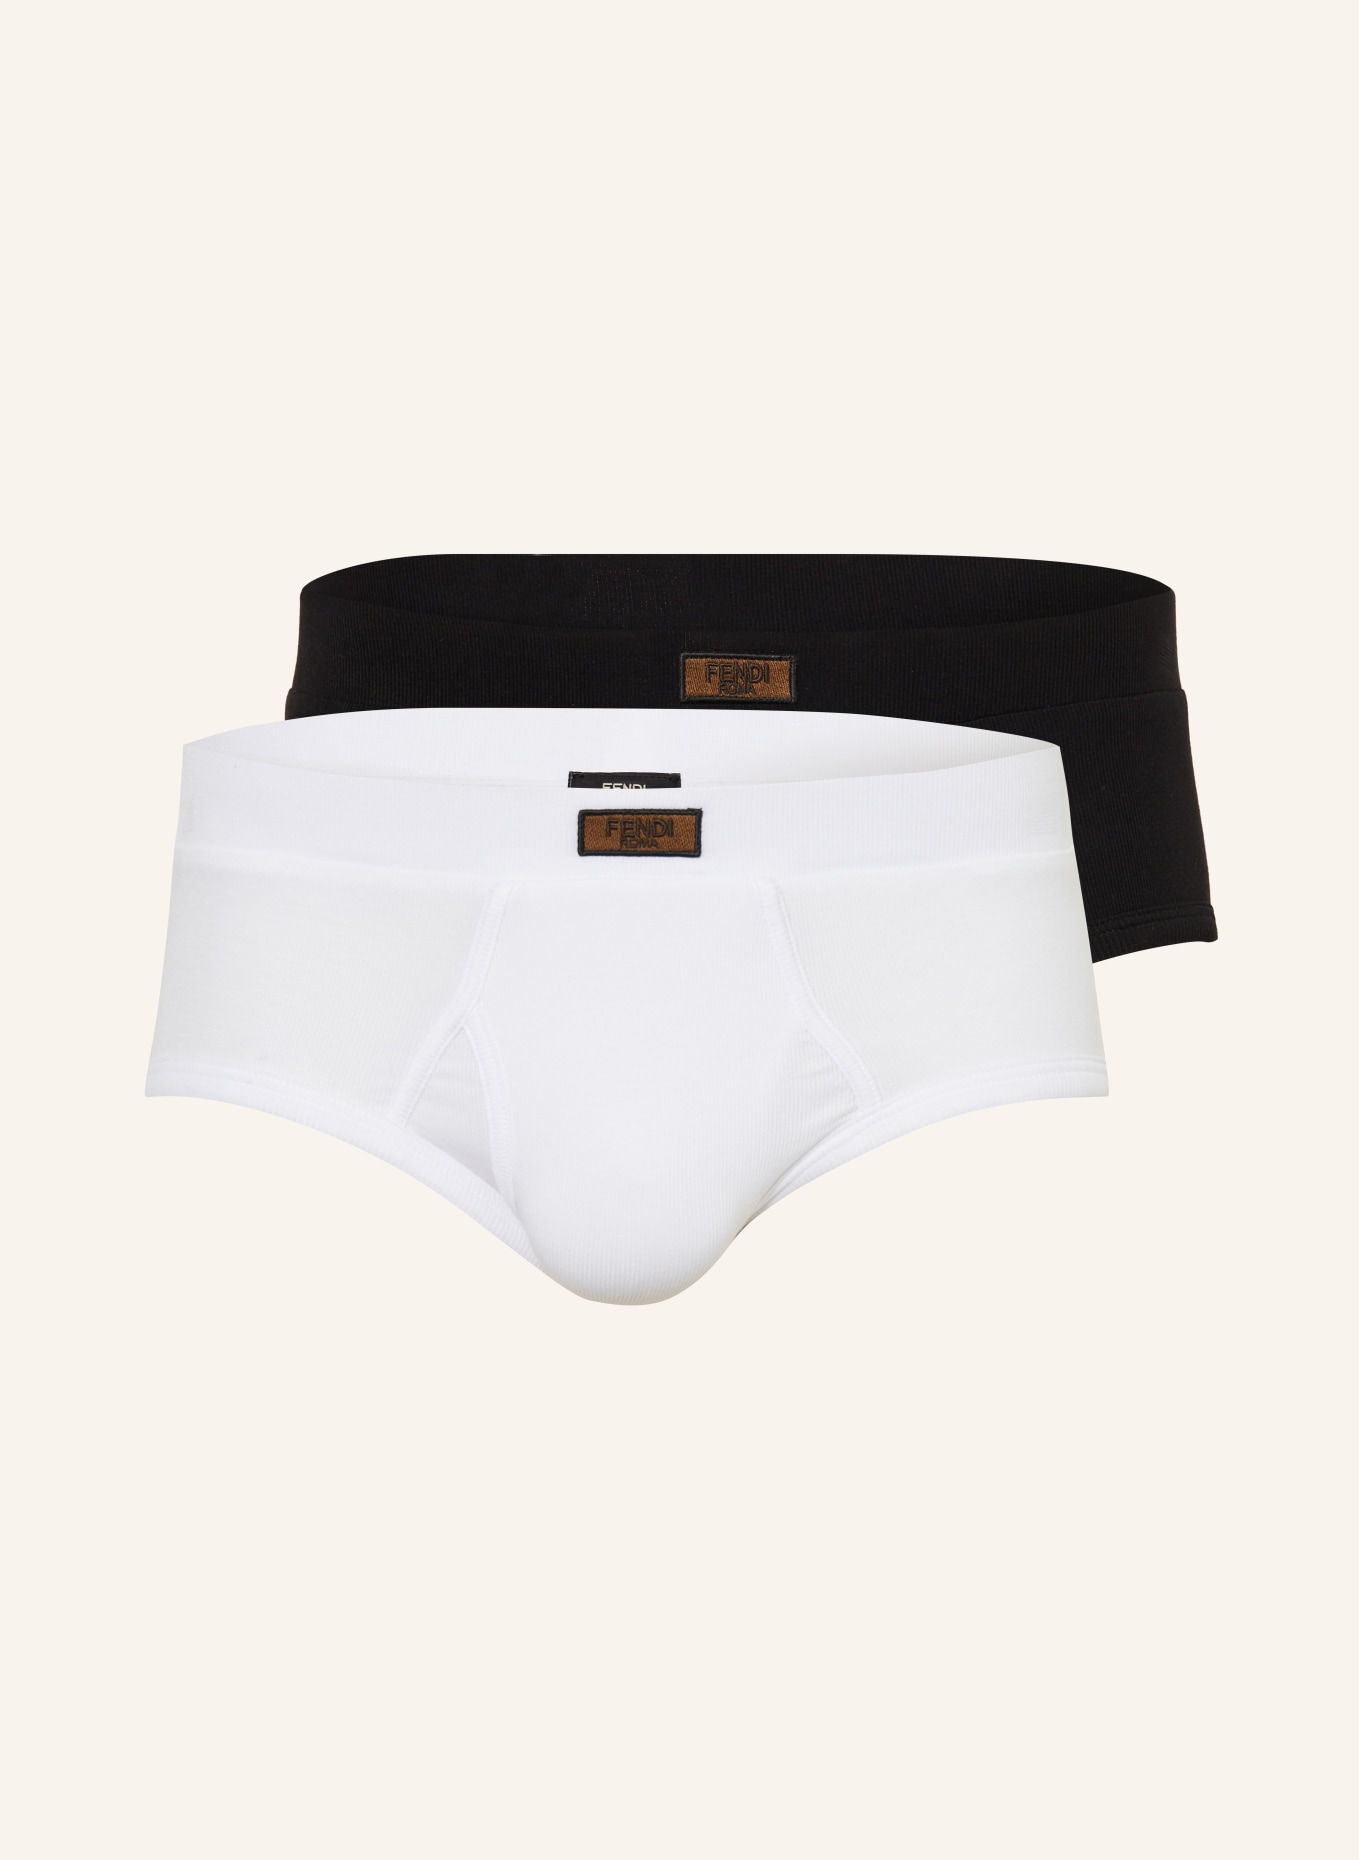 FENDI 2-pack briefs with gift box, Color: BLACK/ WHITE (Image 1)